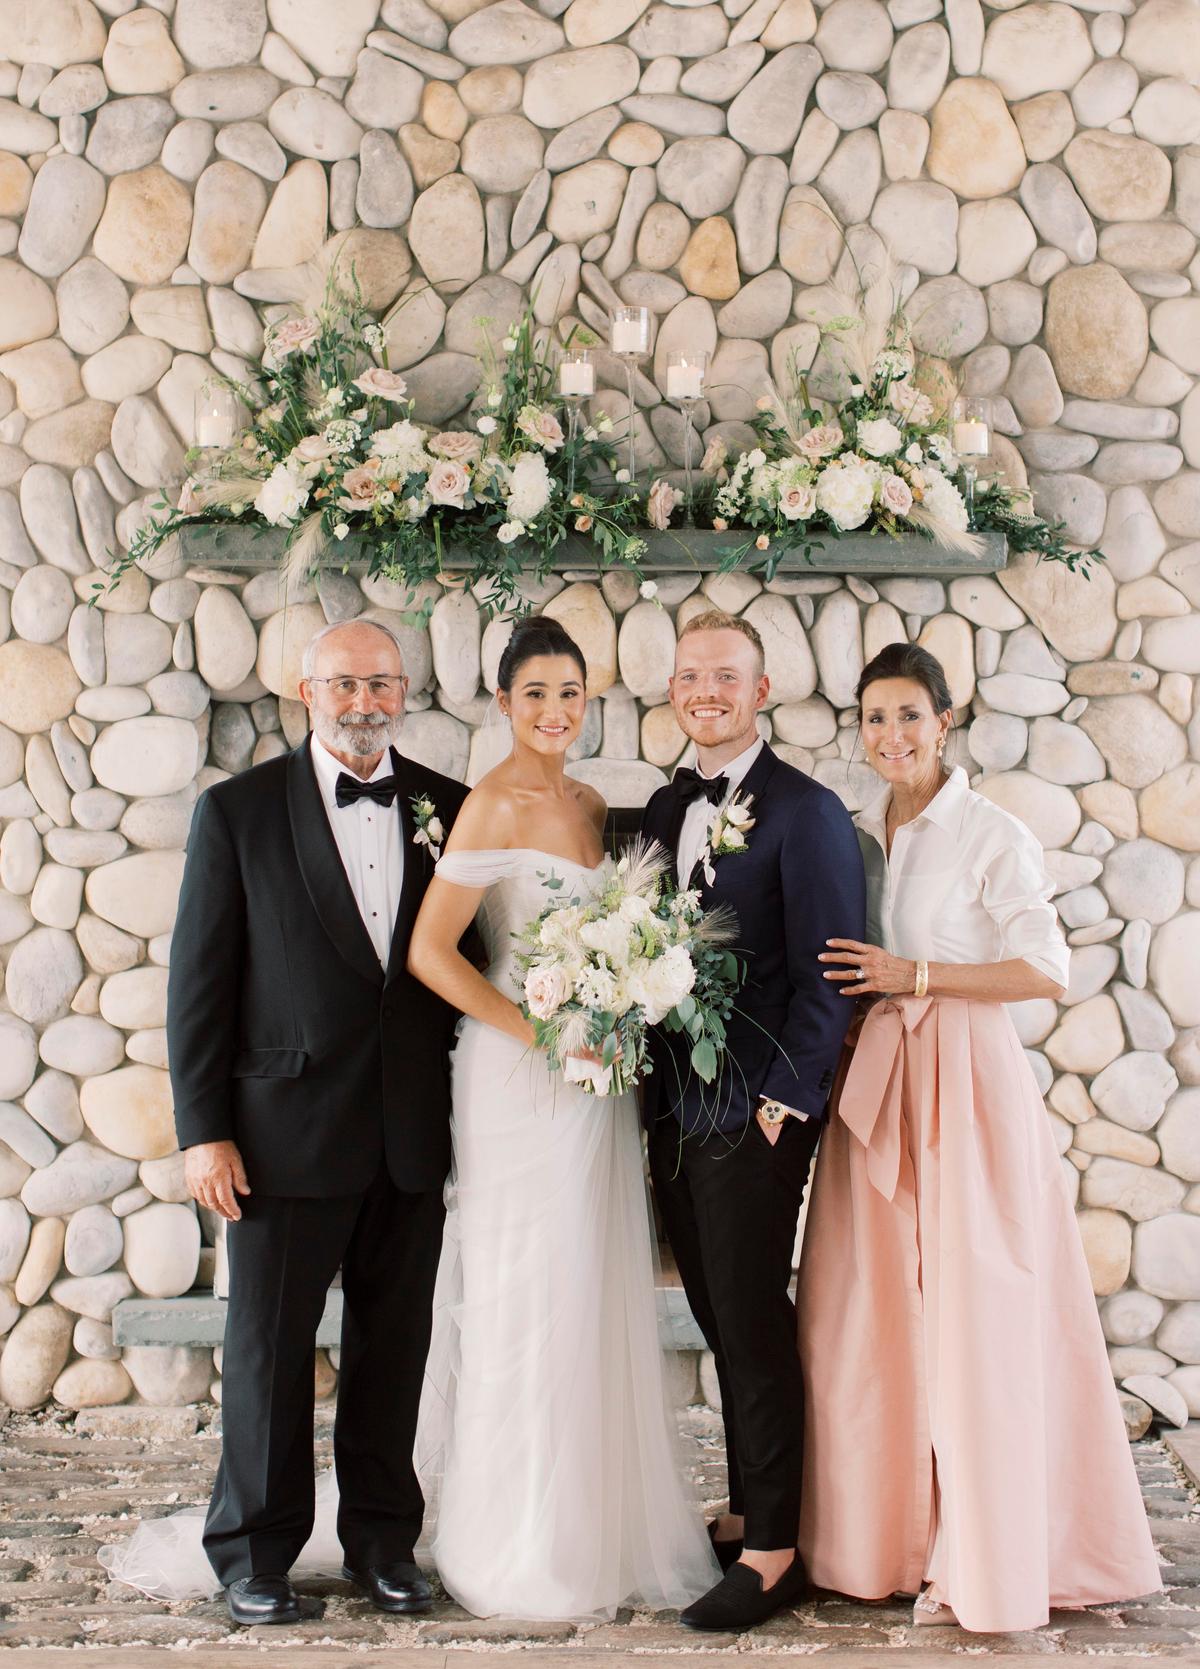 Mr. and Ms. Bishop with the bride's parents. (Courtesy of Brianna Wilbur)